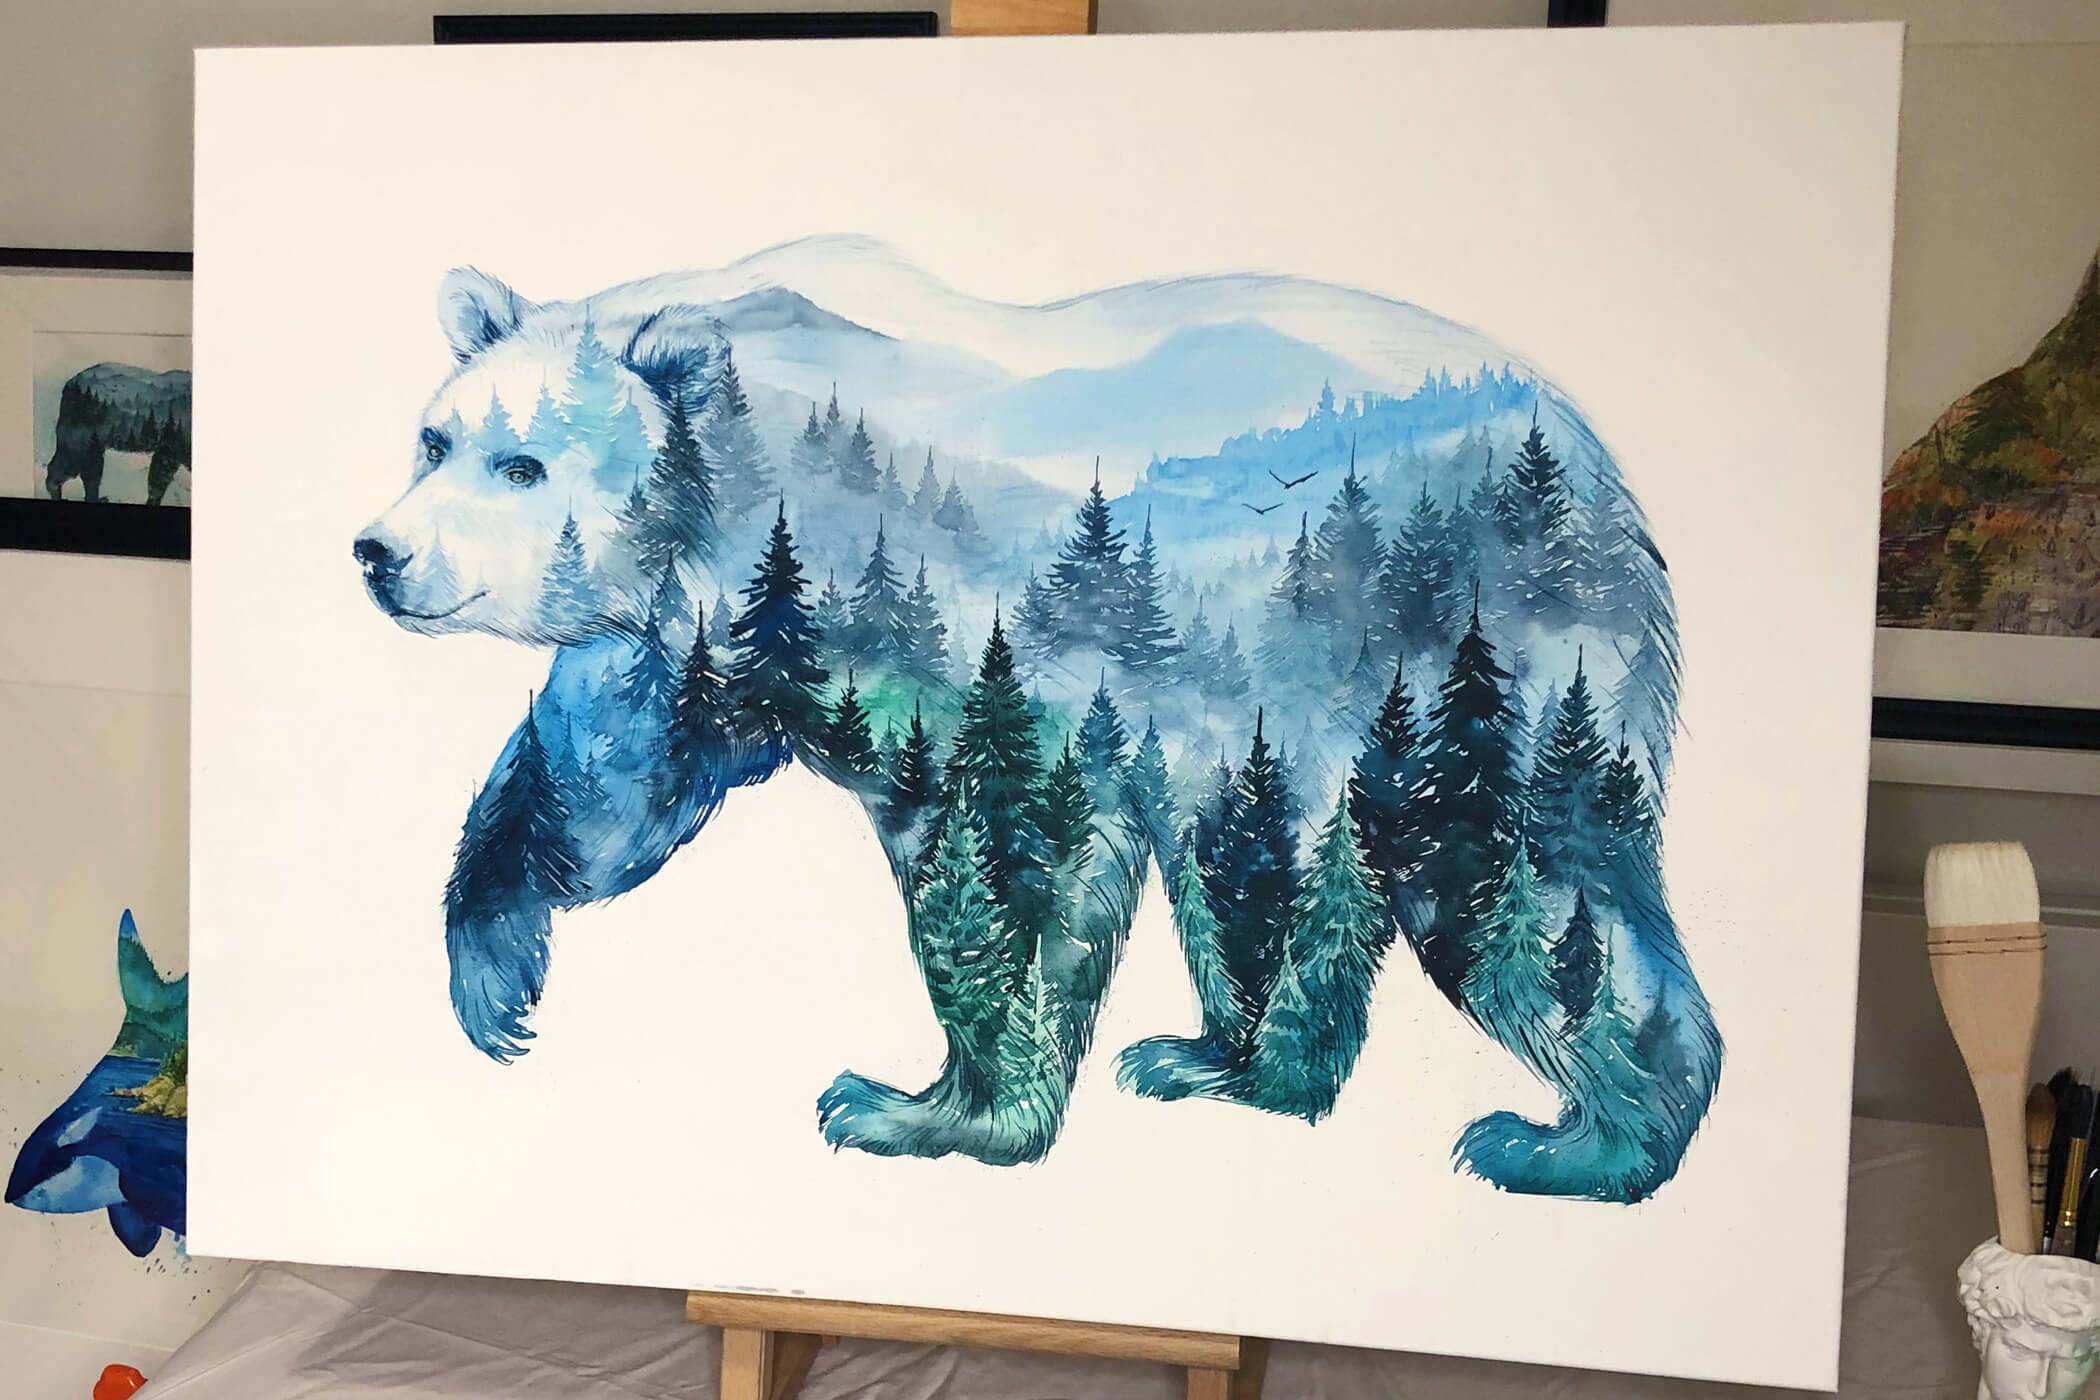 Double Exposure style painting of a bear with a forest within it.